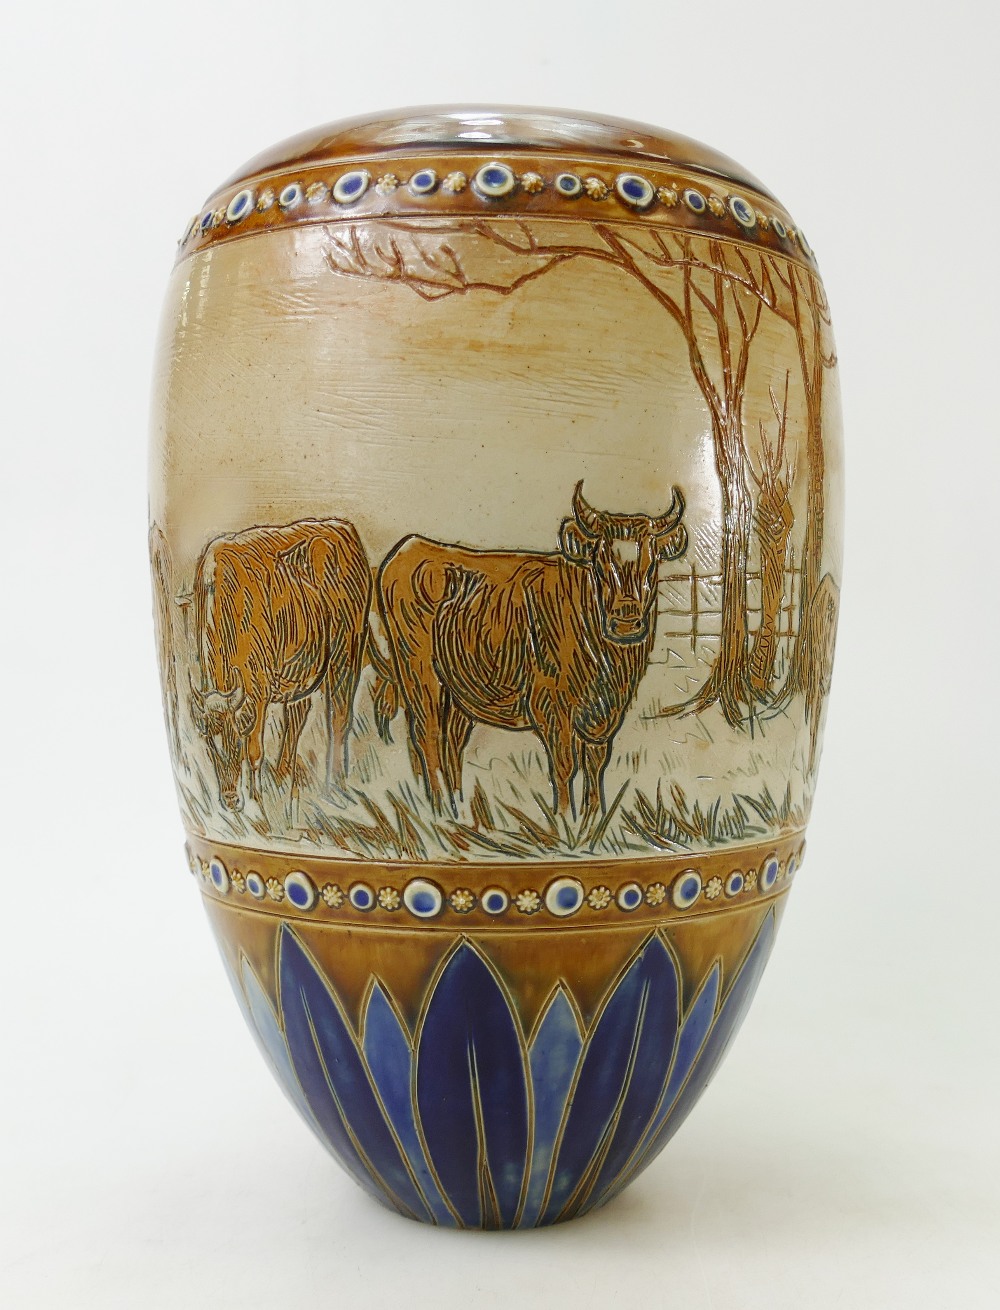 Royal Doulton Hannah Barlow vase: Vase by Royal Dolton decorated all around with cattle and donkeys